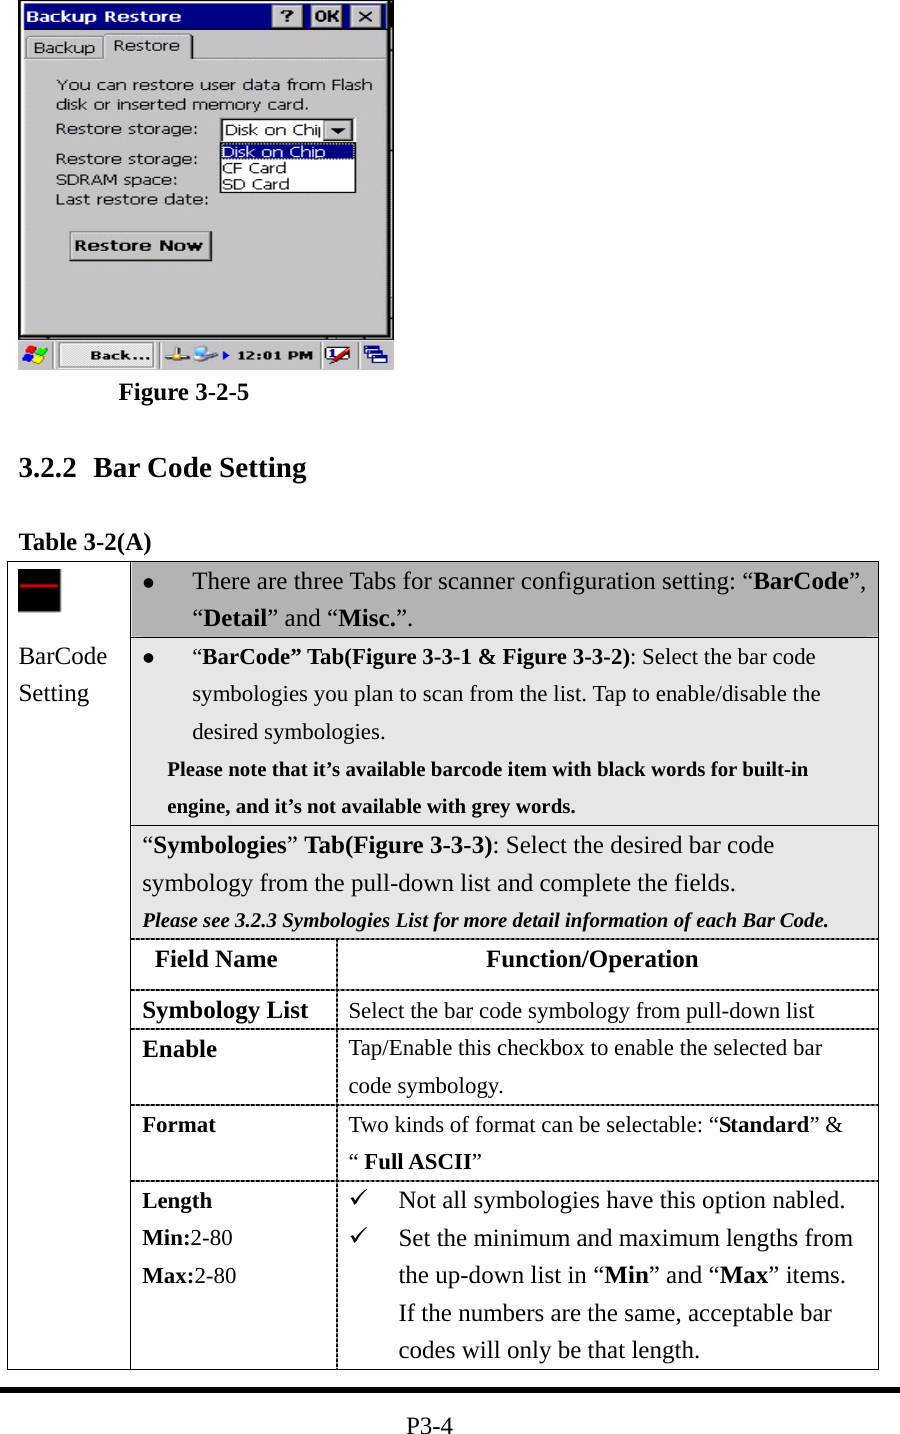  Figure 3-2-5  3.2.2  Bar Code Setting  Table 3-2(A)   There are three Tabs for scanner configuration setting: “BarCode”, “Detail” and “Misc.”.   “BarCode” Tab(Figure 3-3-1 &amp; Figure 3-3-2): Select the bar code symbologies you plan to scan from the list. Tap to enable/disable the desired symbologies.   Please note that it’s available barcode item with black words for built-in engine, and it’s not available with grey words. “Symbologies” Tab(Figure 3-3-3): Select the desired bar code symbology from the pull-down list and complete the fields. Please see 3.2.3 Symbologies List for more detail information of each Bar Code.  Field Name             Function/Operation Symbology List  Select the bar code symbology from pull-down list Enable  Tap/Enable this checkbox to enable the selected bar code symbology. Format  Two kinds of format can be selectable: “Standard” &amp; “ Full ASCII”  BarCode Setting Length Min:2-80 Max:2-80   Not all symbologies have this option nabled.   Set the minimum and maximum lengths from the up-down list in “Min” and “Max” items. If the numbers are the same, acceptable bar codes will only be that length.  P3-4 